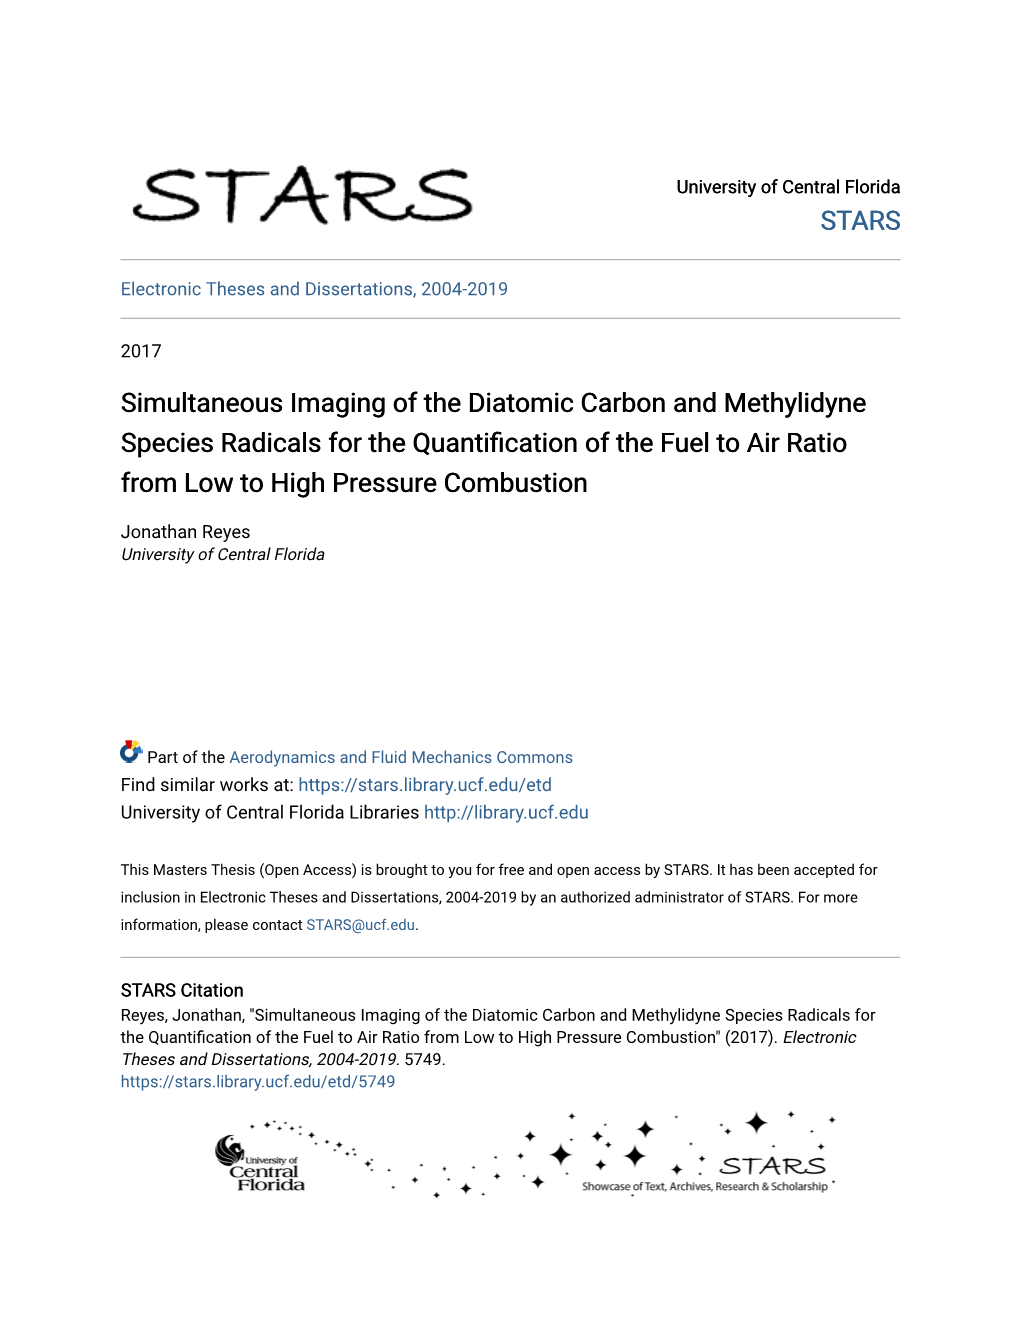 Simultaneous Imaging of the Diatomic Carbon and Methylidyne Species Radicals for the Quantification of the Uelf to Air Ratio from Low to High Pressure Combustion